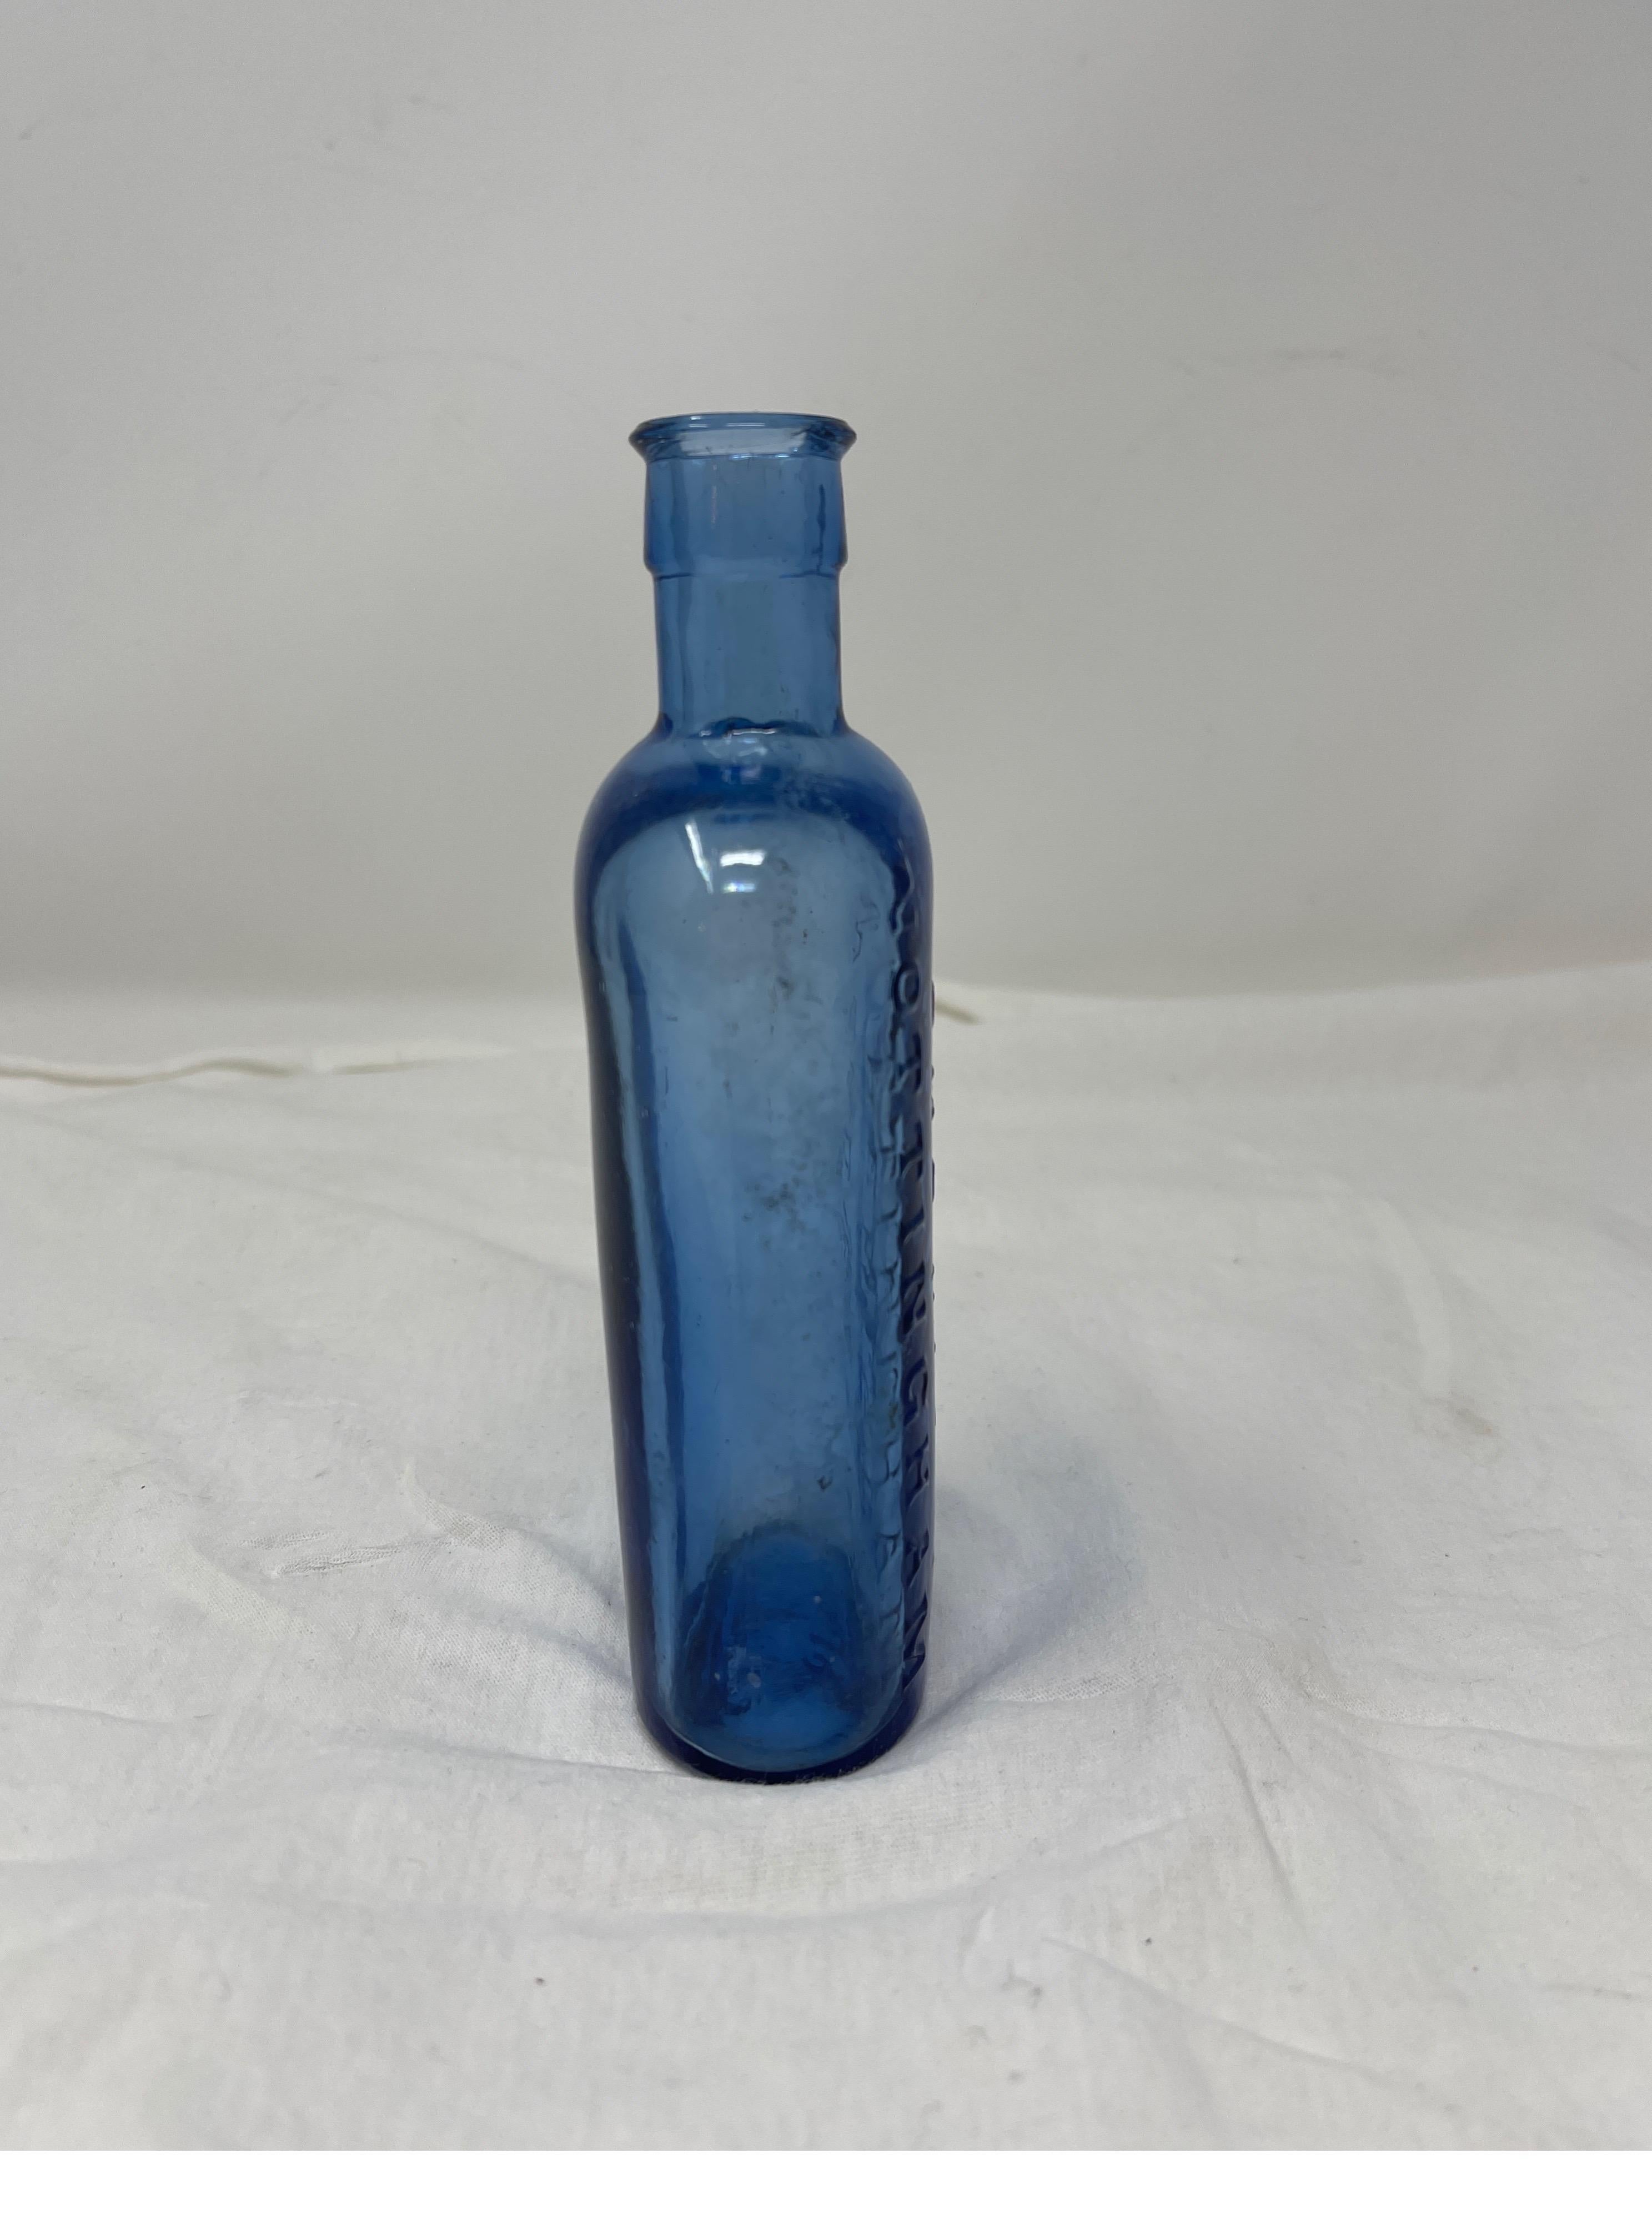 This is a semi rare cobalt blue antique chemist bottle. It has a hand tooled top and its strongly embossed Woodward Chemist Nottingham. 
A vintage gem!
6